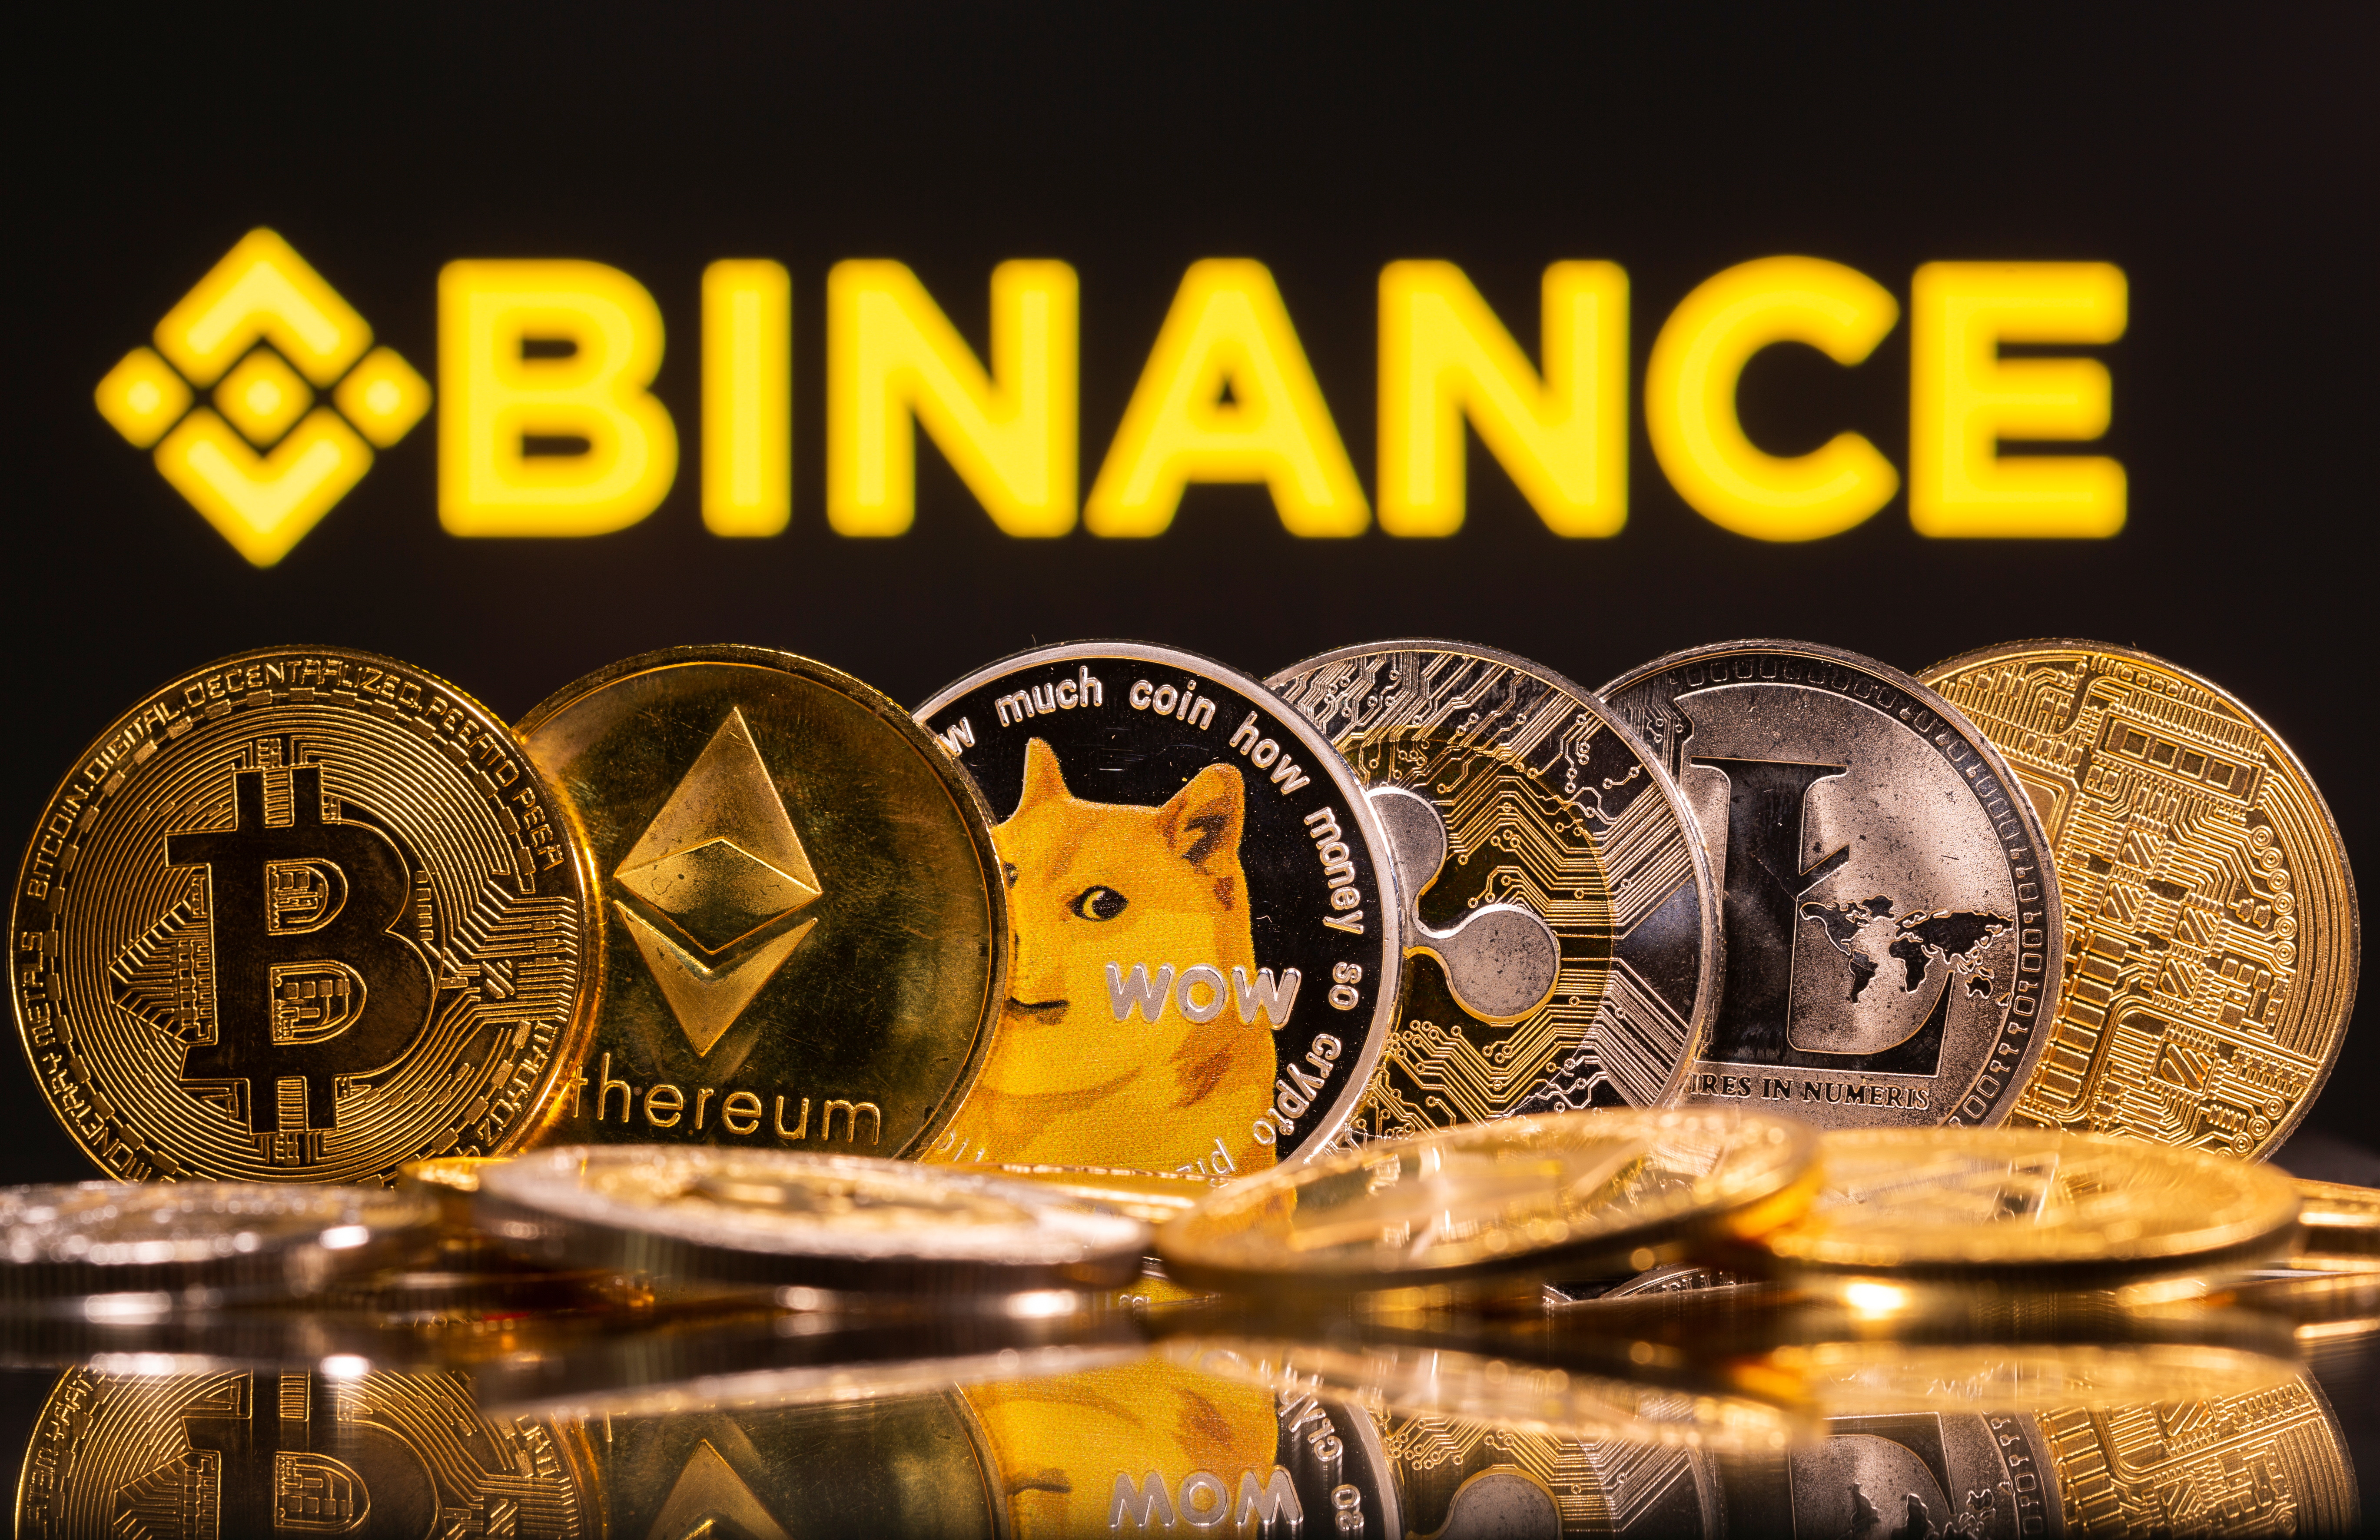 How Safe is Binance for Storing my Coins? - ChainSec